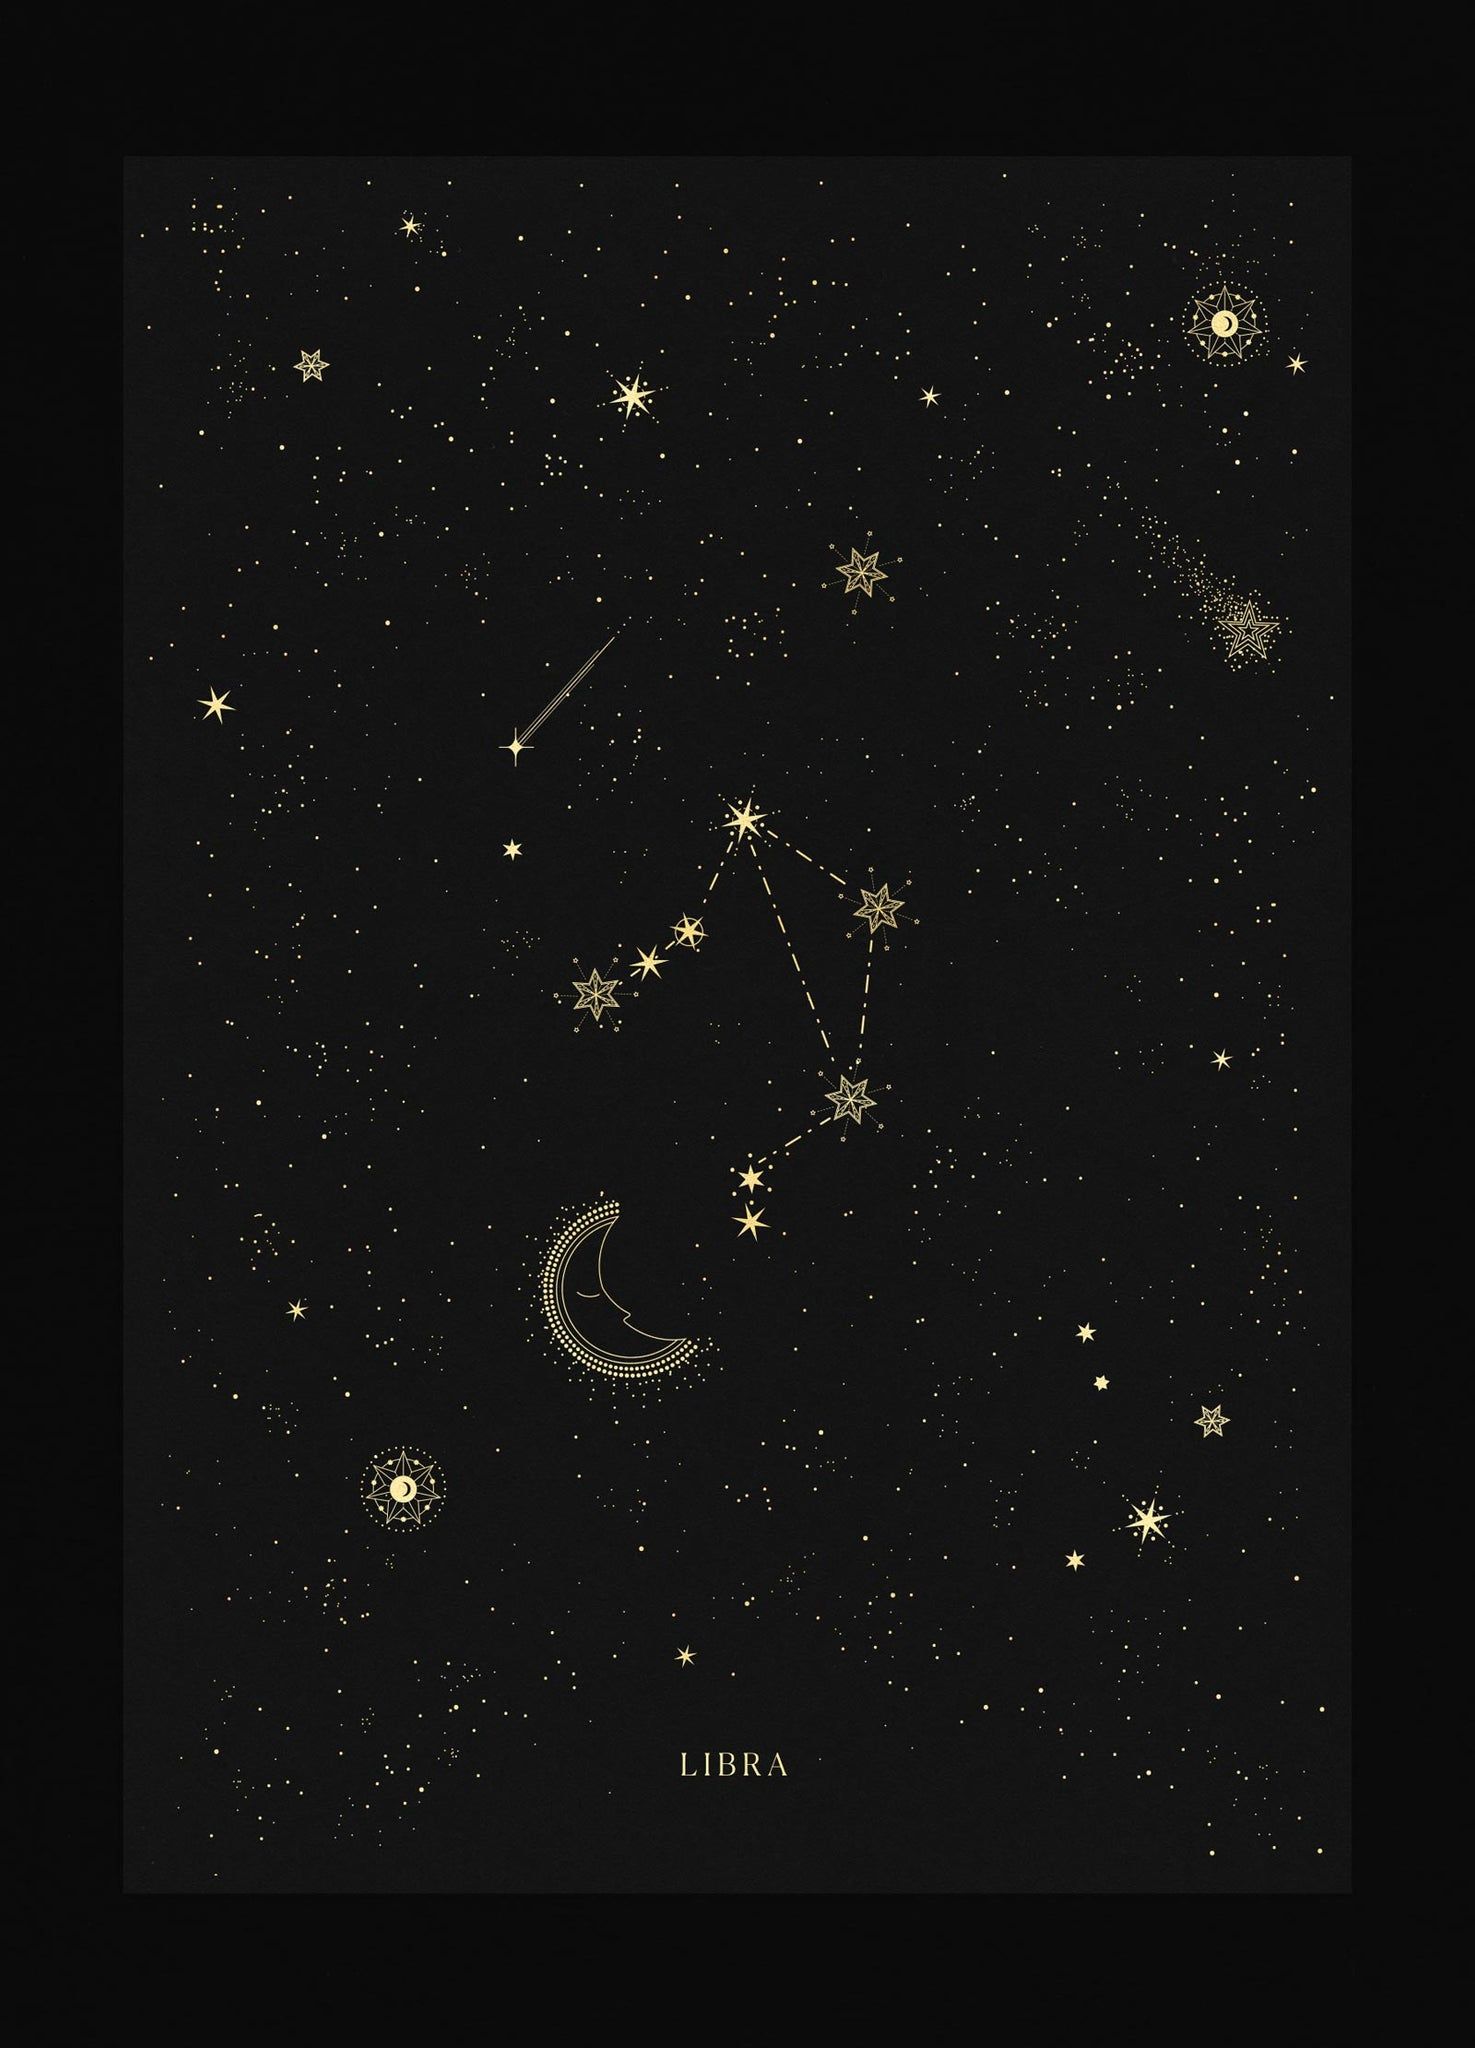 A poster with the constellation of libra - Libra